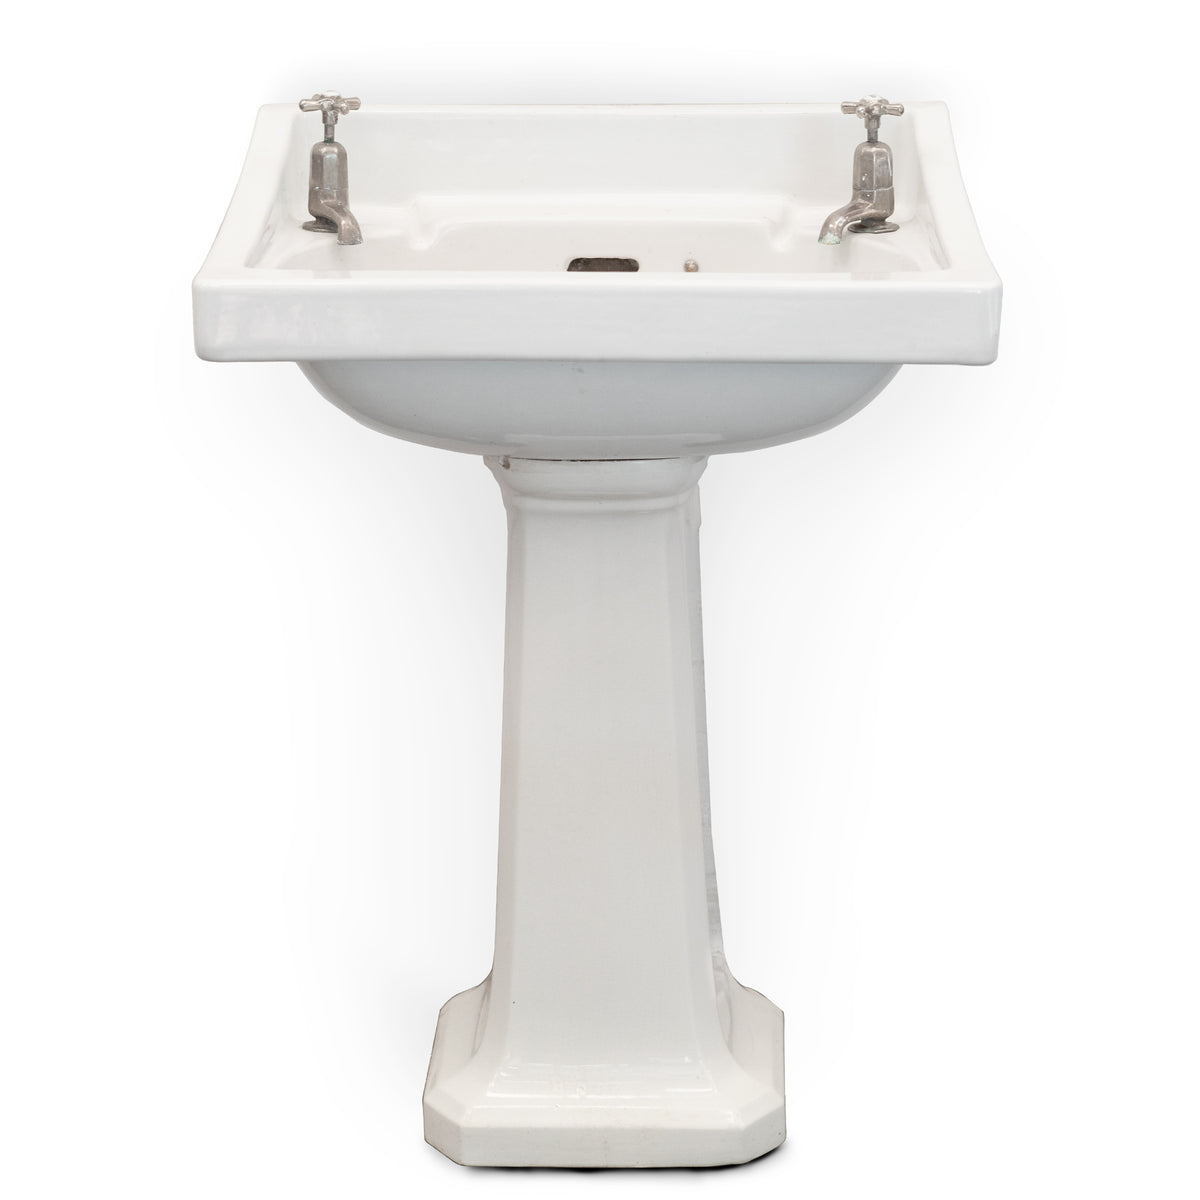 Reclaimed Royal Doulton Sink on Pedestal Stand | The Architectural Forum